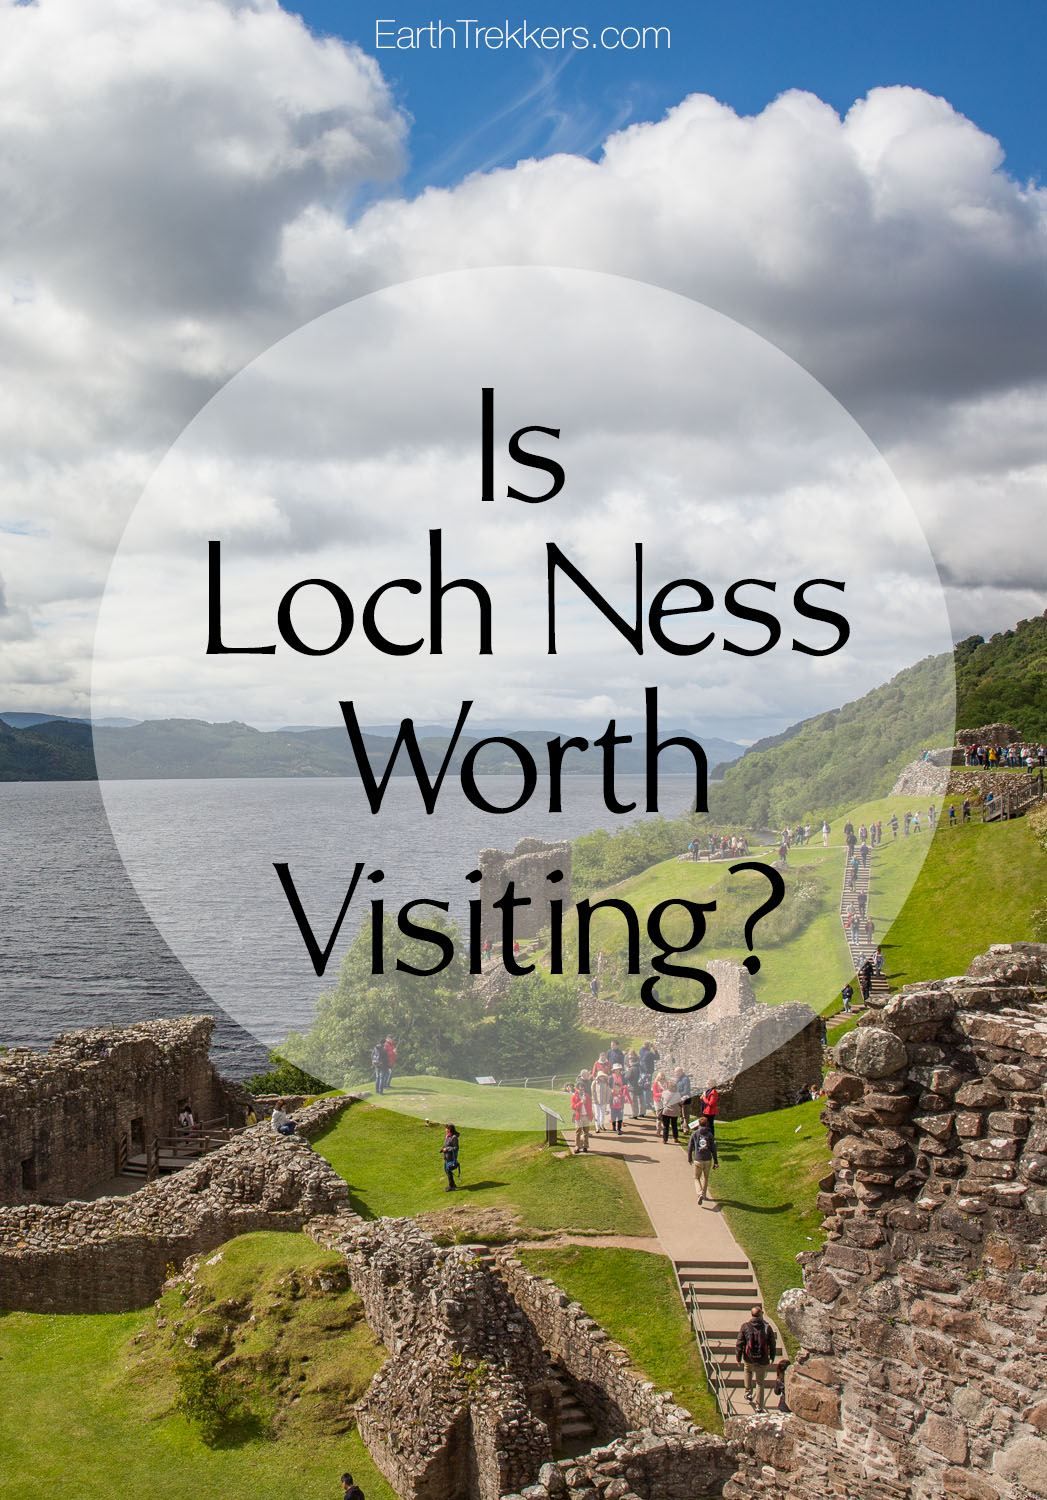 Loch Ness and Urquhart Castle Worth Visiting?